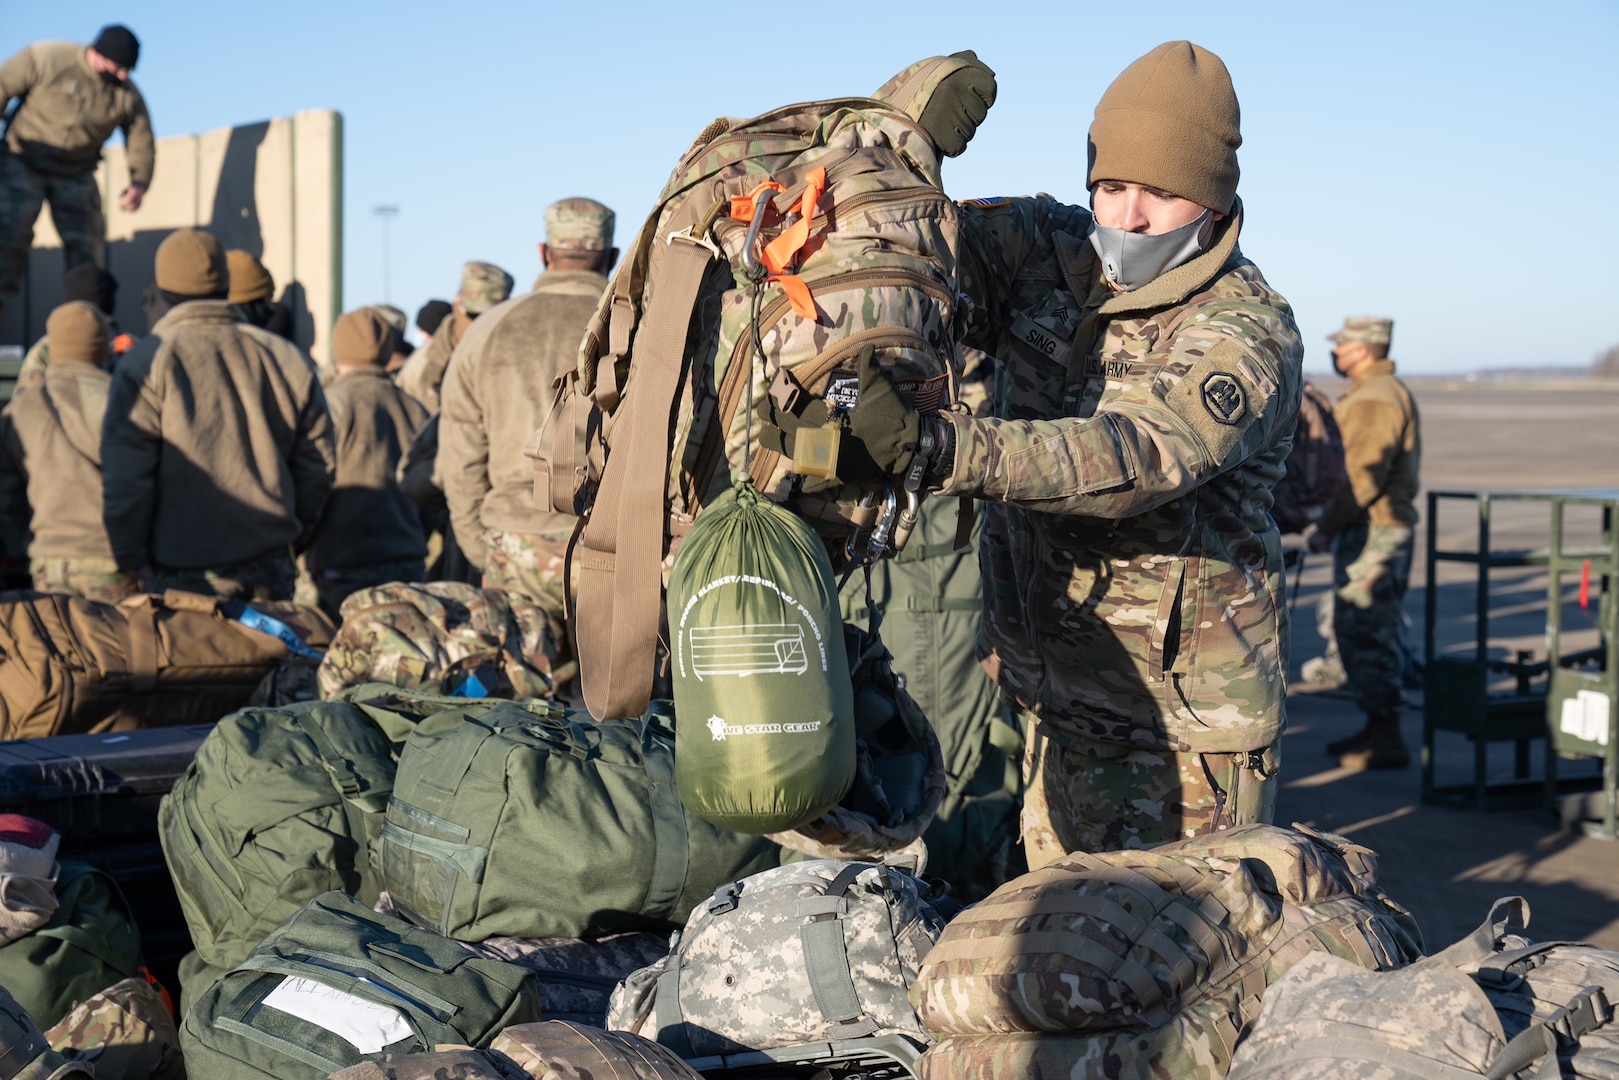 Louisiana National Guard Soldiers and Airmen from throughout the state prep their gear and board planes at Alexandria Airport in Alexandria, Louisiana, en route to Washington, D.C., Jan. 16, 2021. They will assist the District of Columbia National Guard to ensure a safe presidential inauguration.